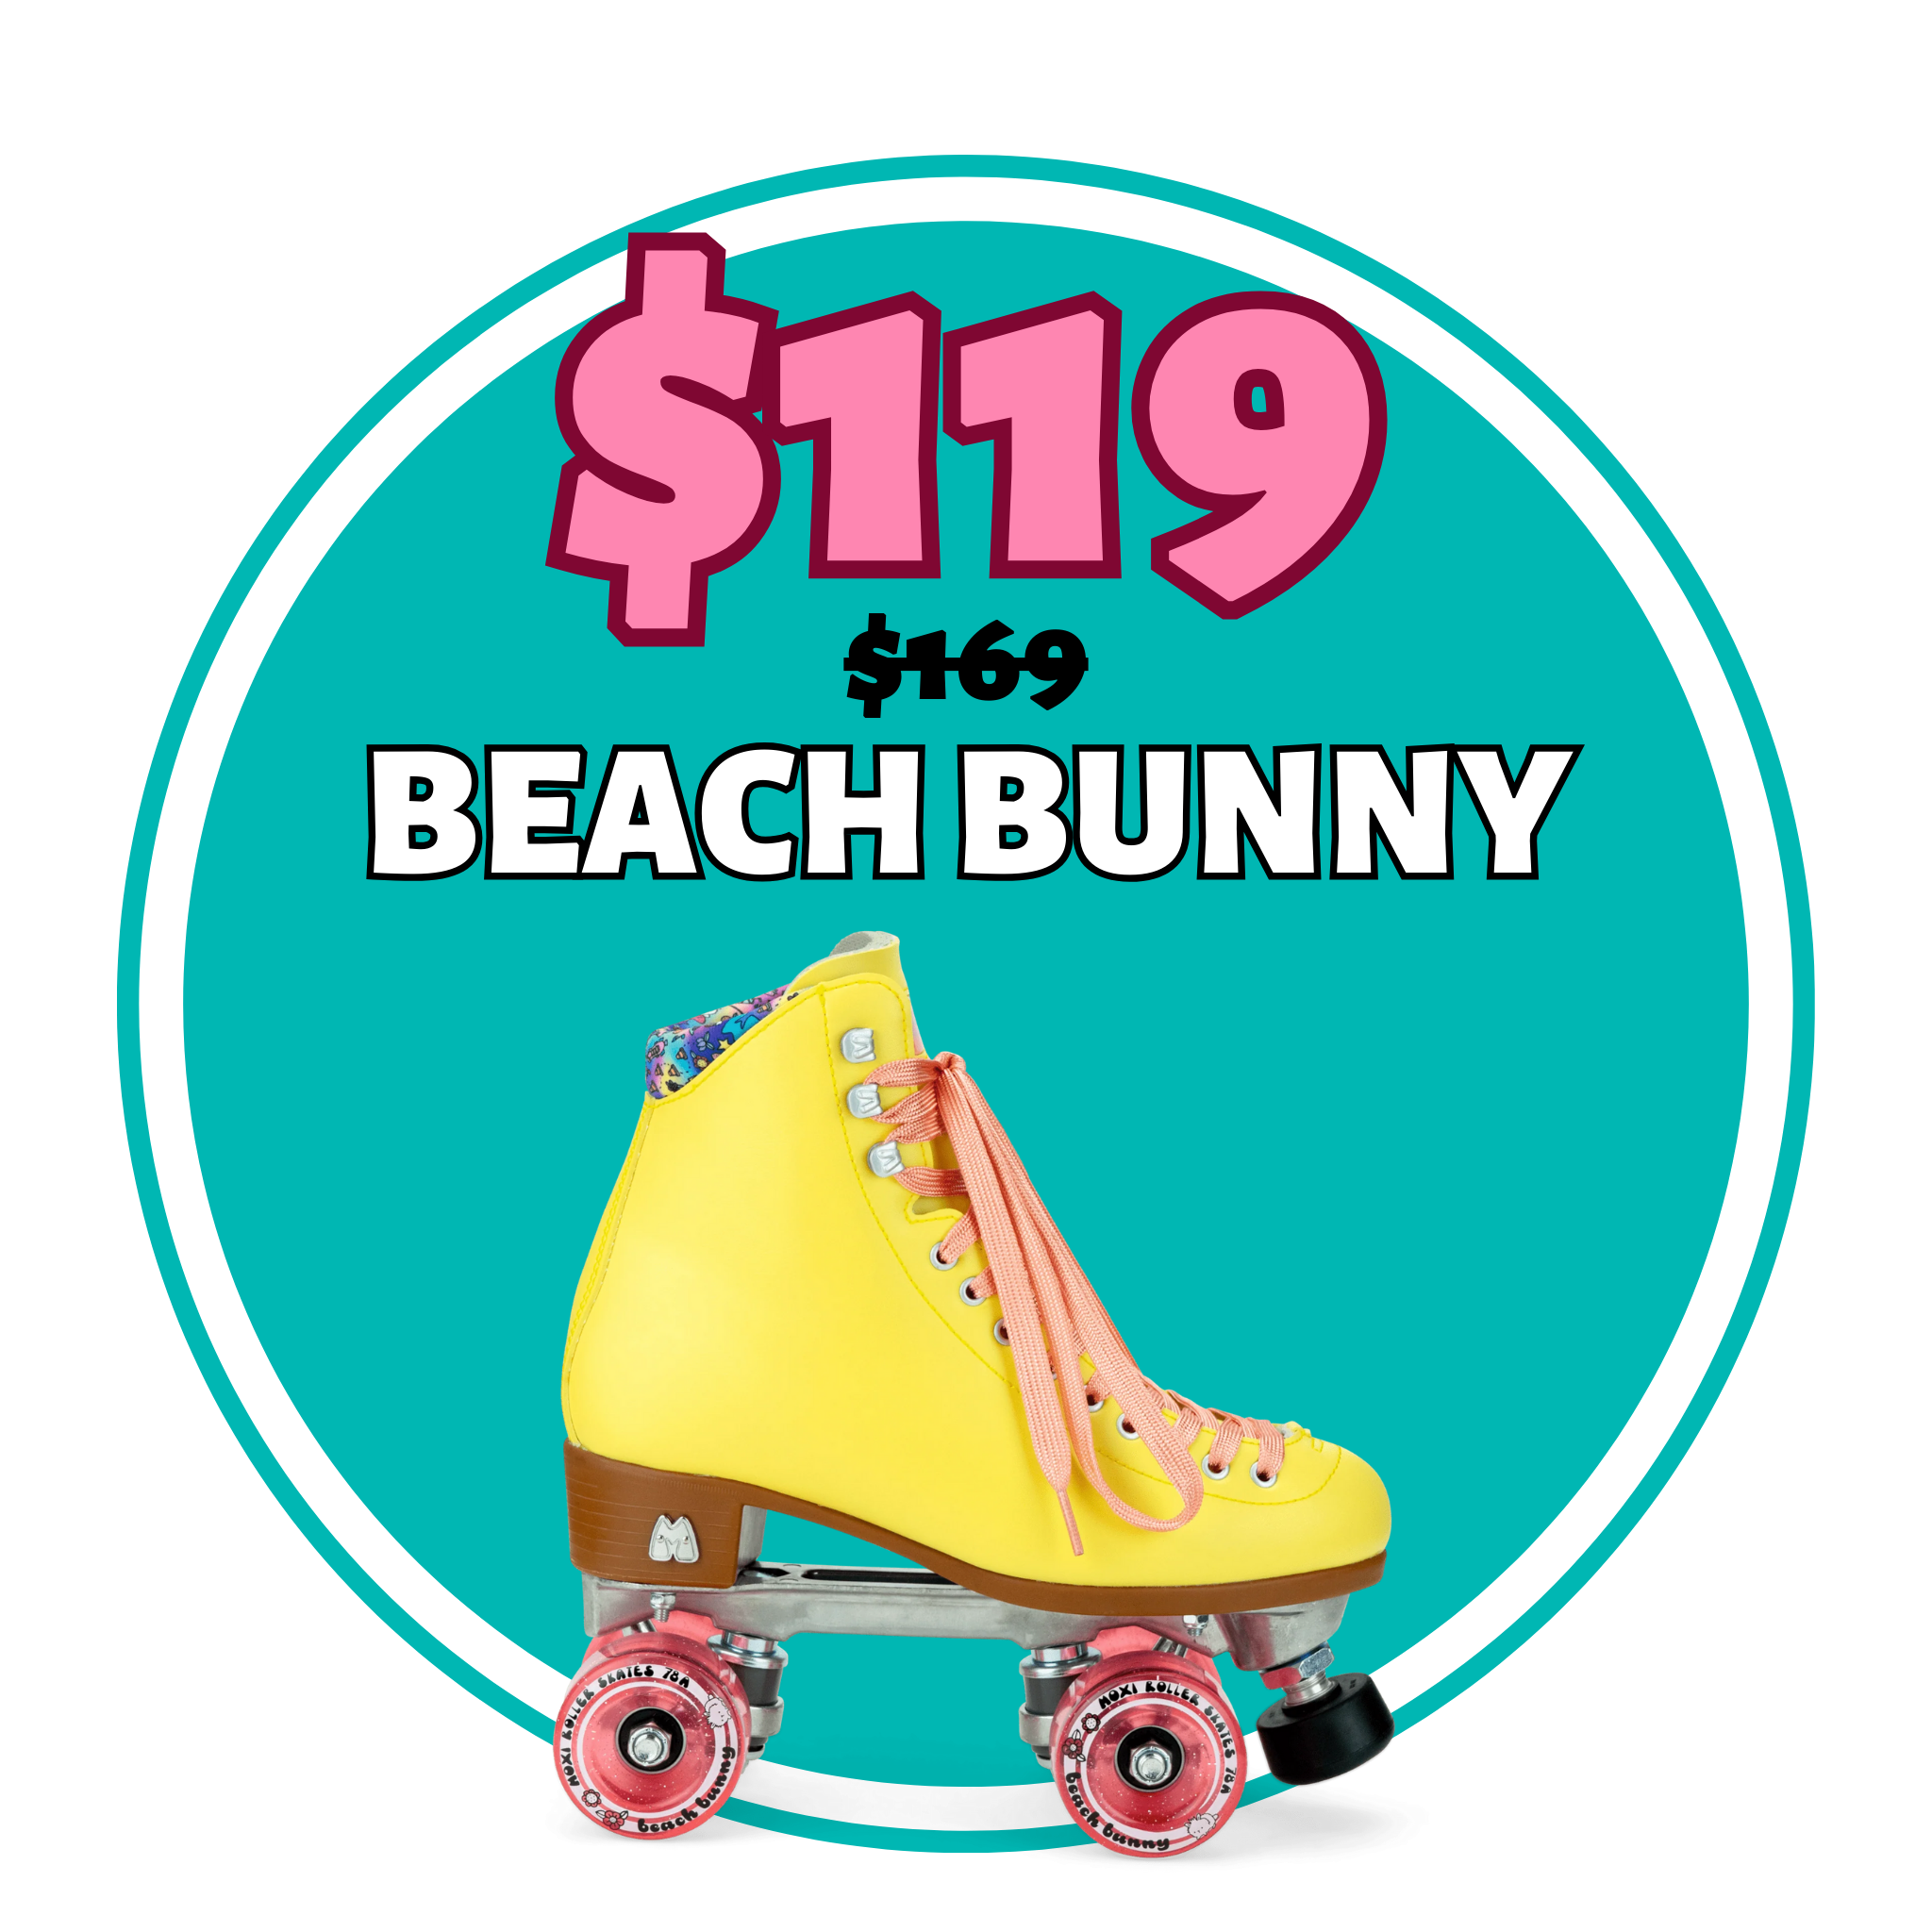 beach bunny. regularly $169, on sale for $119